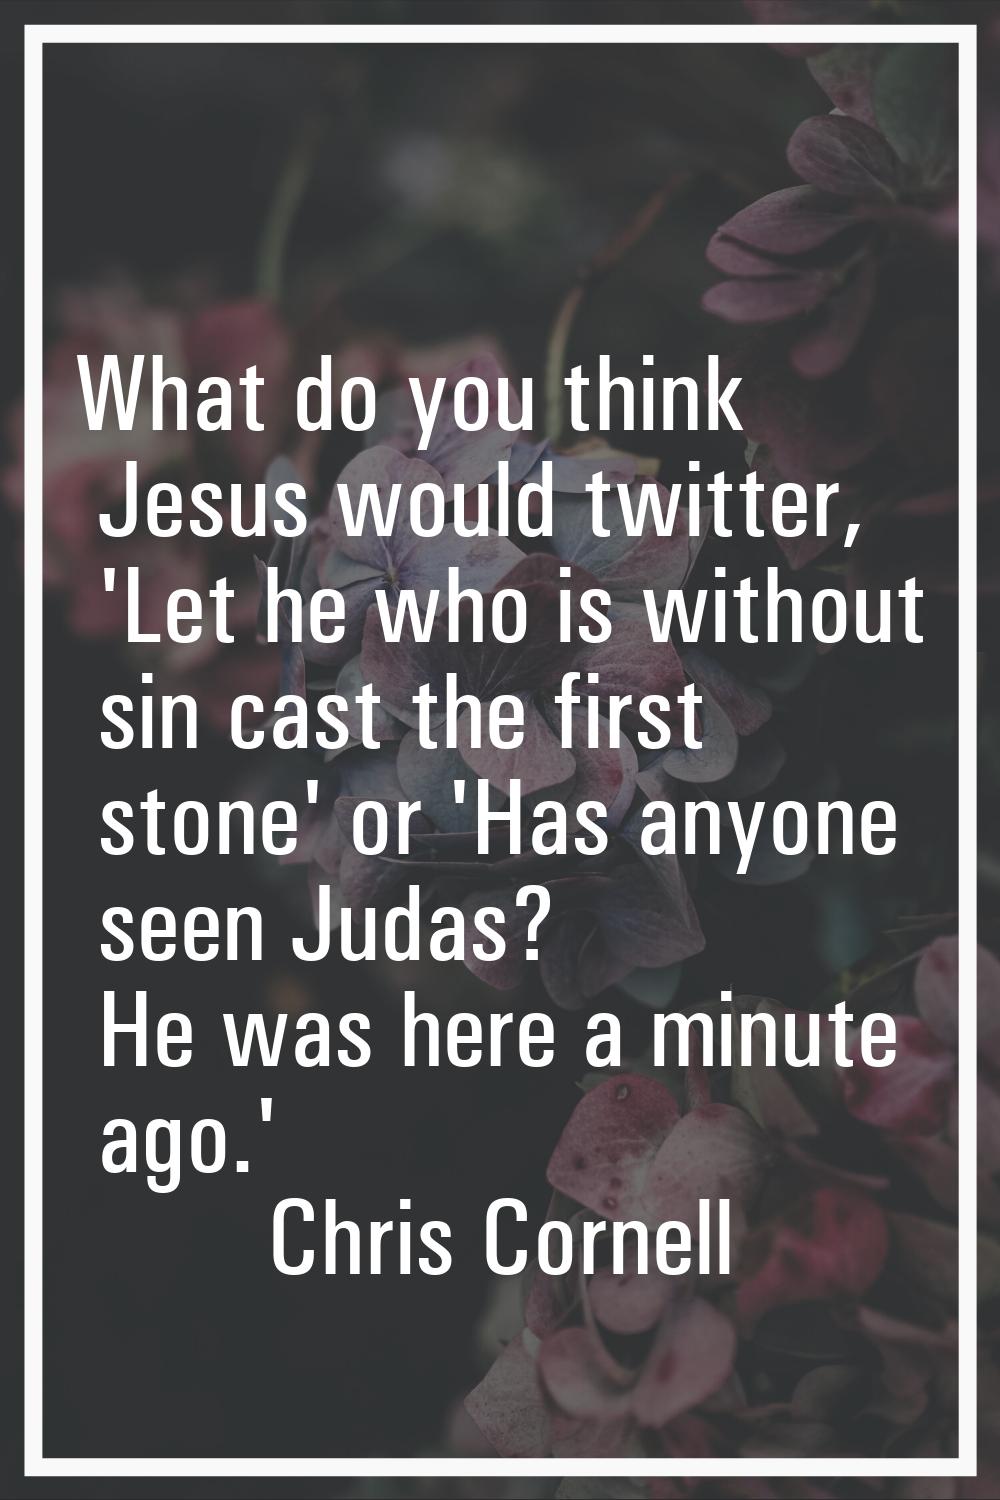 What do you think Jesus would twitter, 'Let he who is without sin cast the first stone' or 'Has any